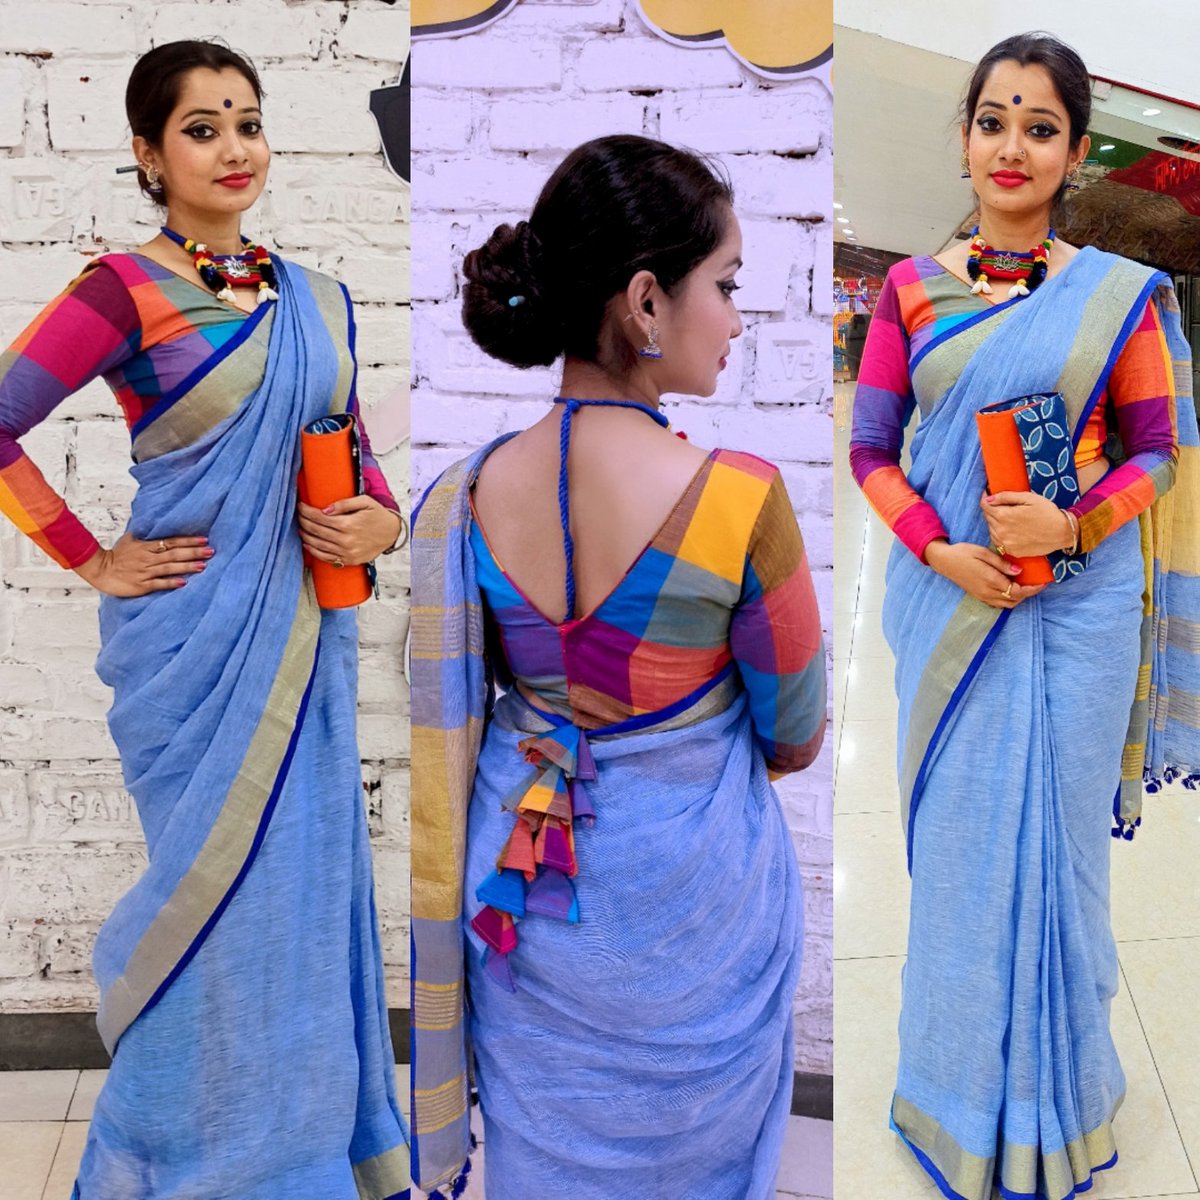 Reigning my love for the timeless classic, The Sarees..❤️. A must wear for bengalis during Durga Puja..
#saree #love #sareeloversofinstagram #linensarees #durgapuja2020 #traditionalwear #hairstyles #blousestyle #earrings #culturematters #jewellery #blue #designerwear #purselover